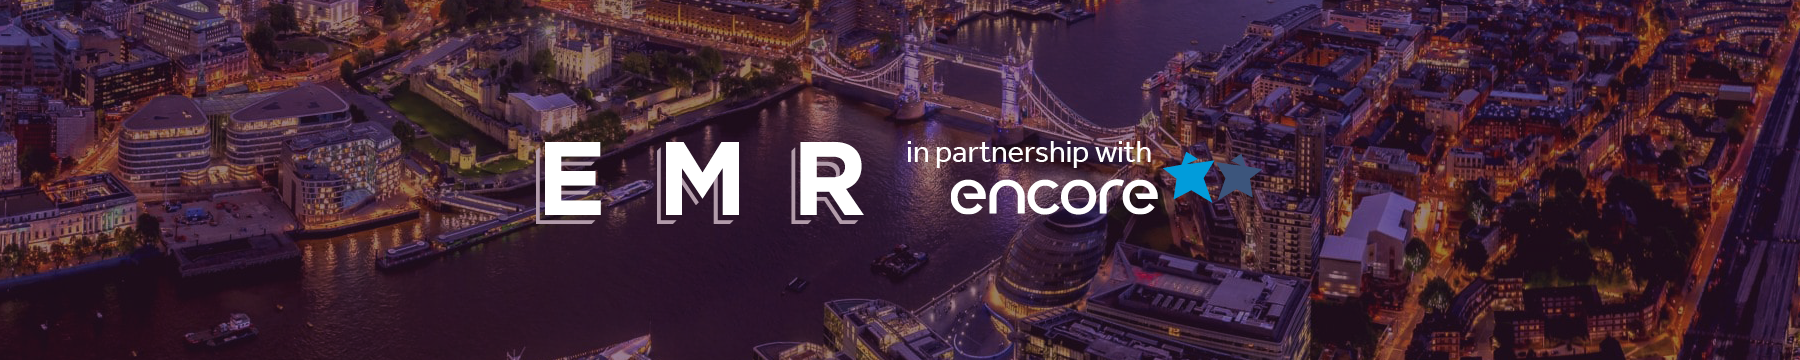 EMR in partnership with Encore 